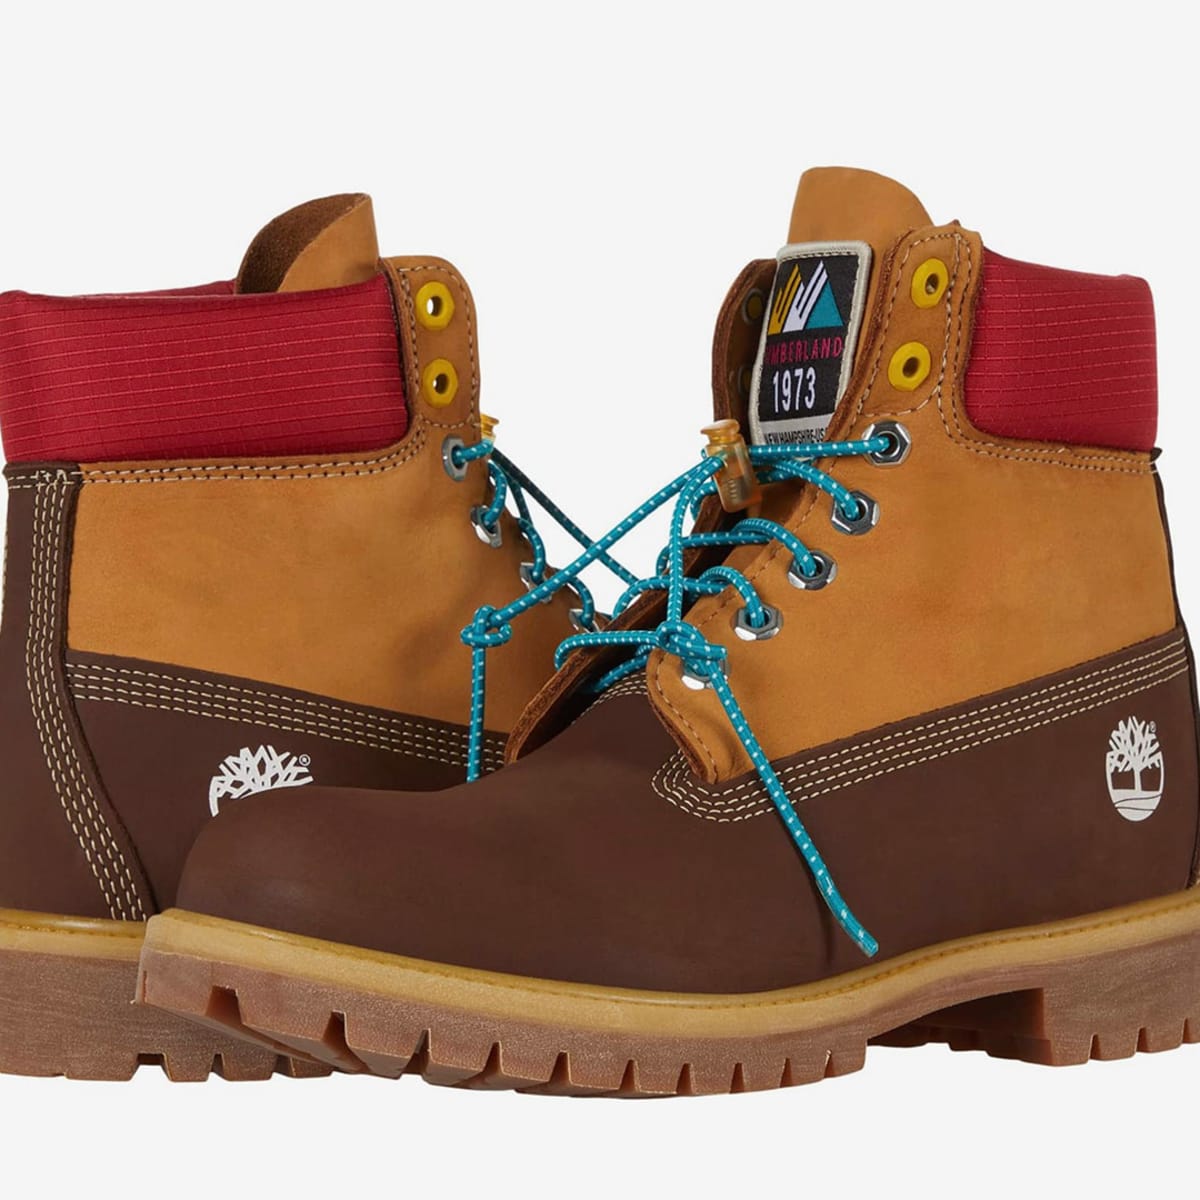 Get Yourself a New Timberland Boots From Zappos Right Now - Journal